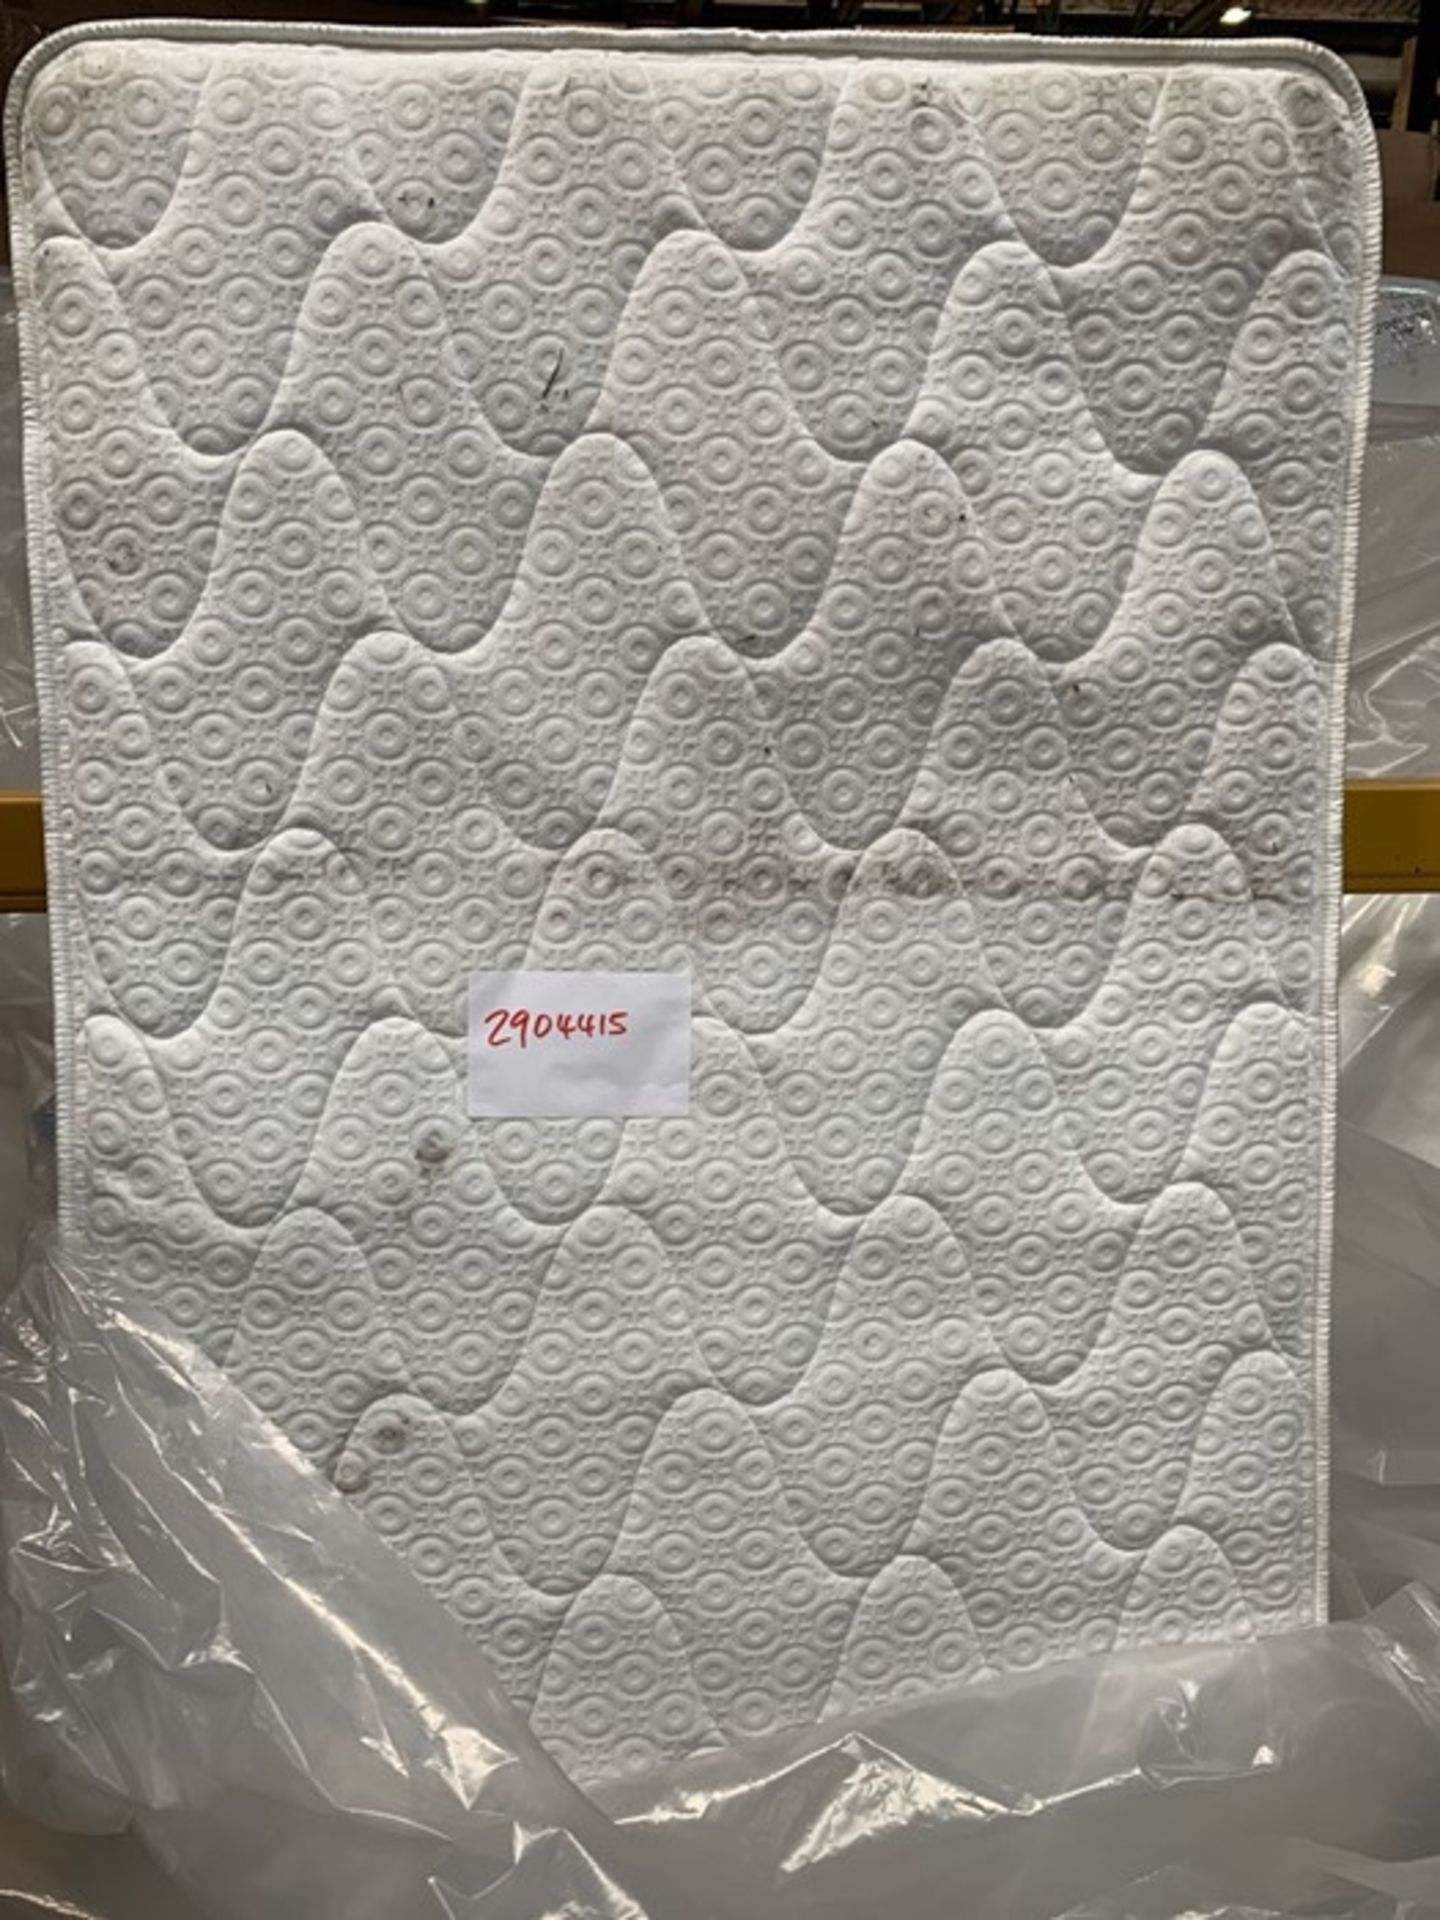 SILENT NIGHT SLEEP SOUNDLY MIRACOIL 90CM MATTRESS - Image 2 of 2